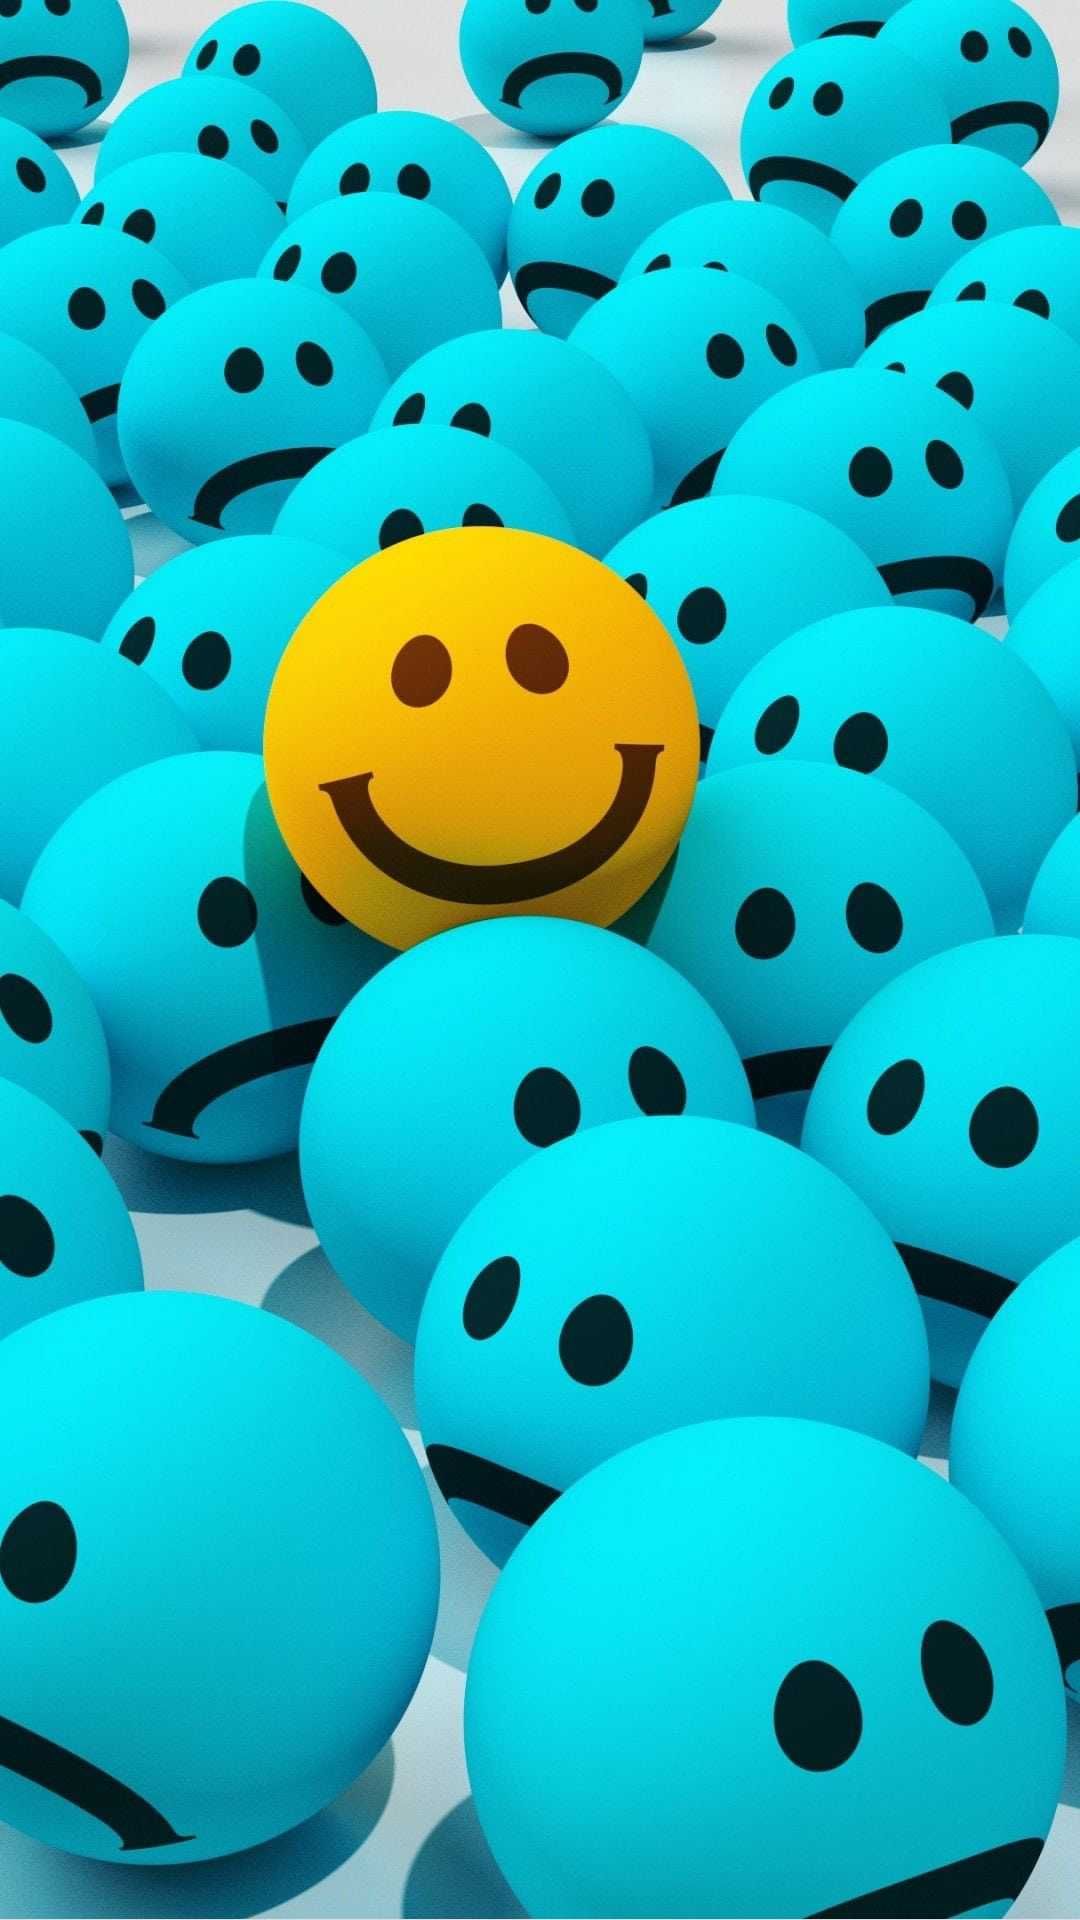 Smiley Face Wallpaper Phone Discover more Always Smile, Be Happy, Happy, Happy Face, Smile wallpaper.. Happy wallpaper, iPhone wallpaper, Crazy wallpaper